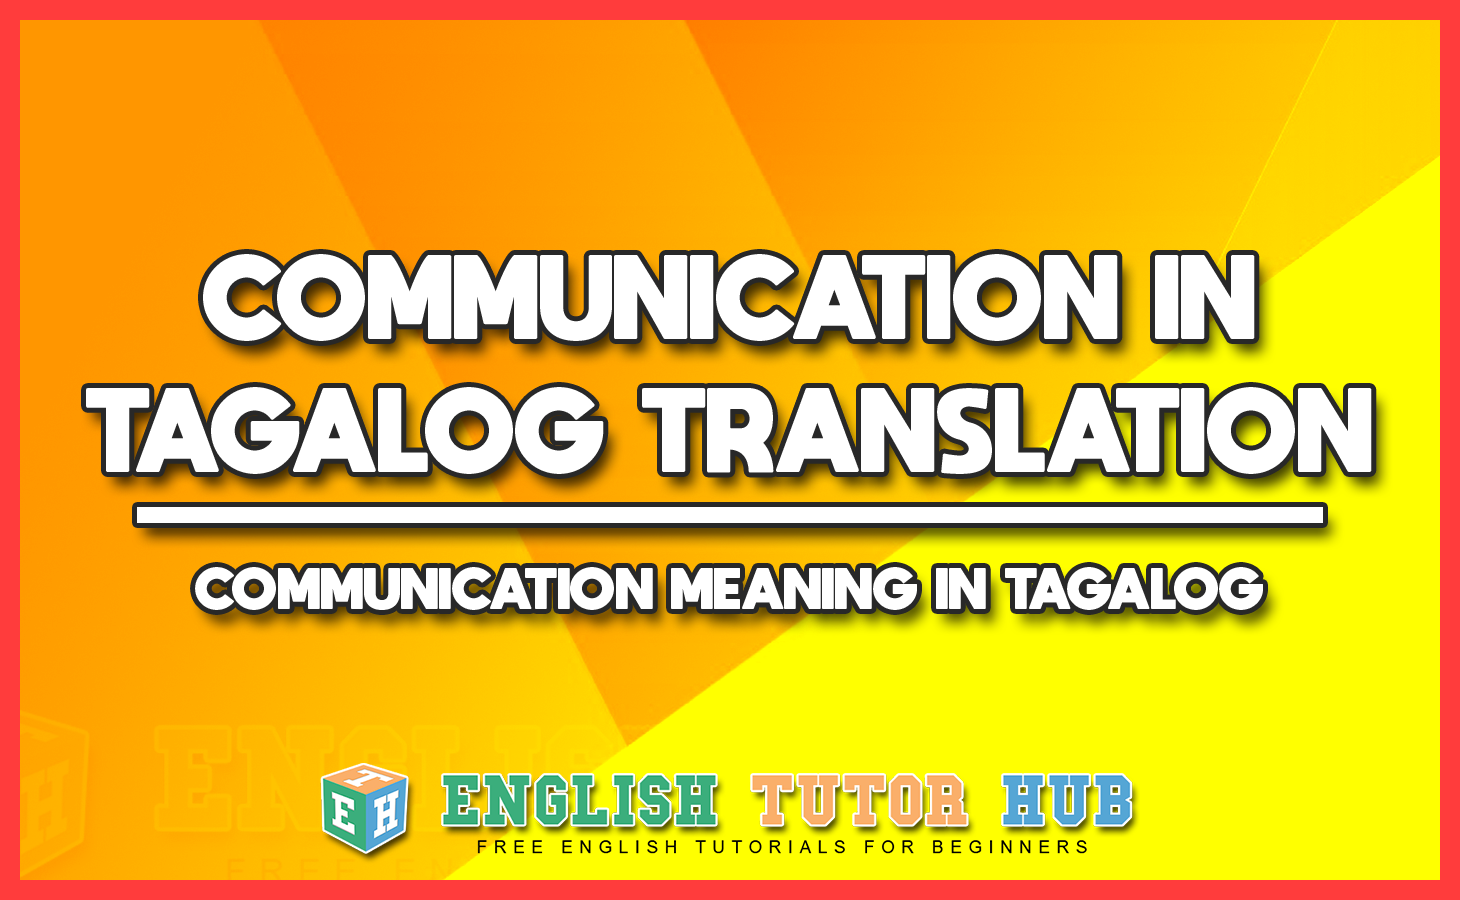 COMMUNICATION IN TAGALOG TRANSLATION - COMMUNICATION MEANING IN TAGALOG